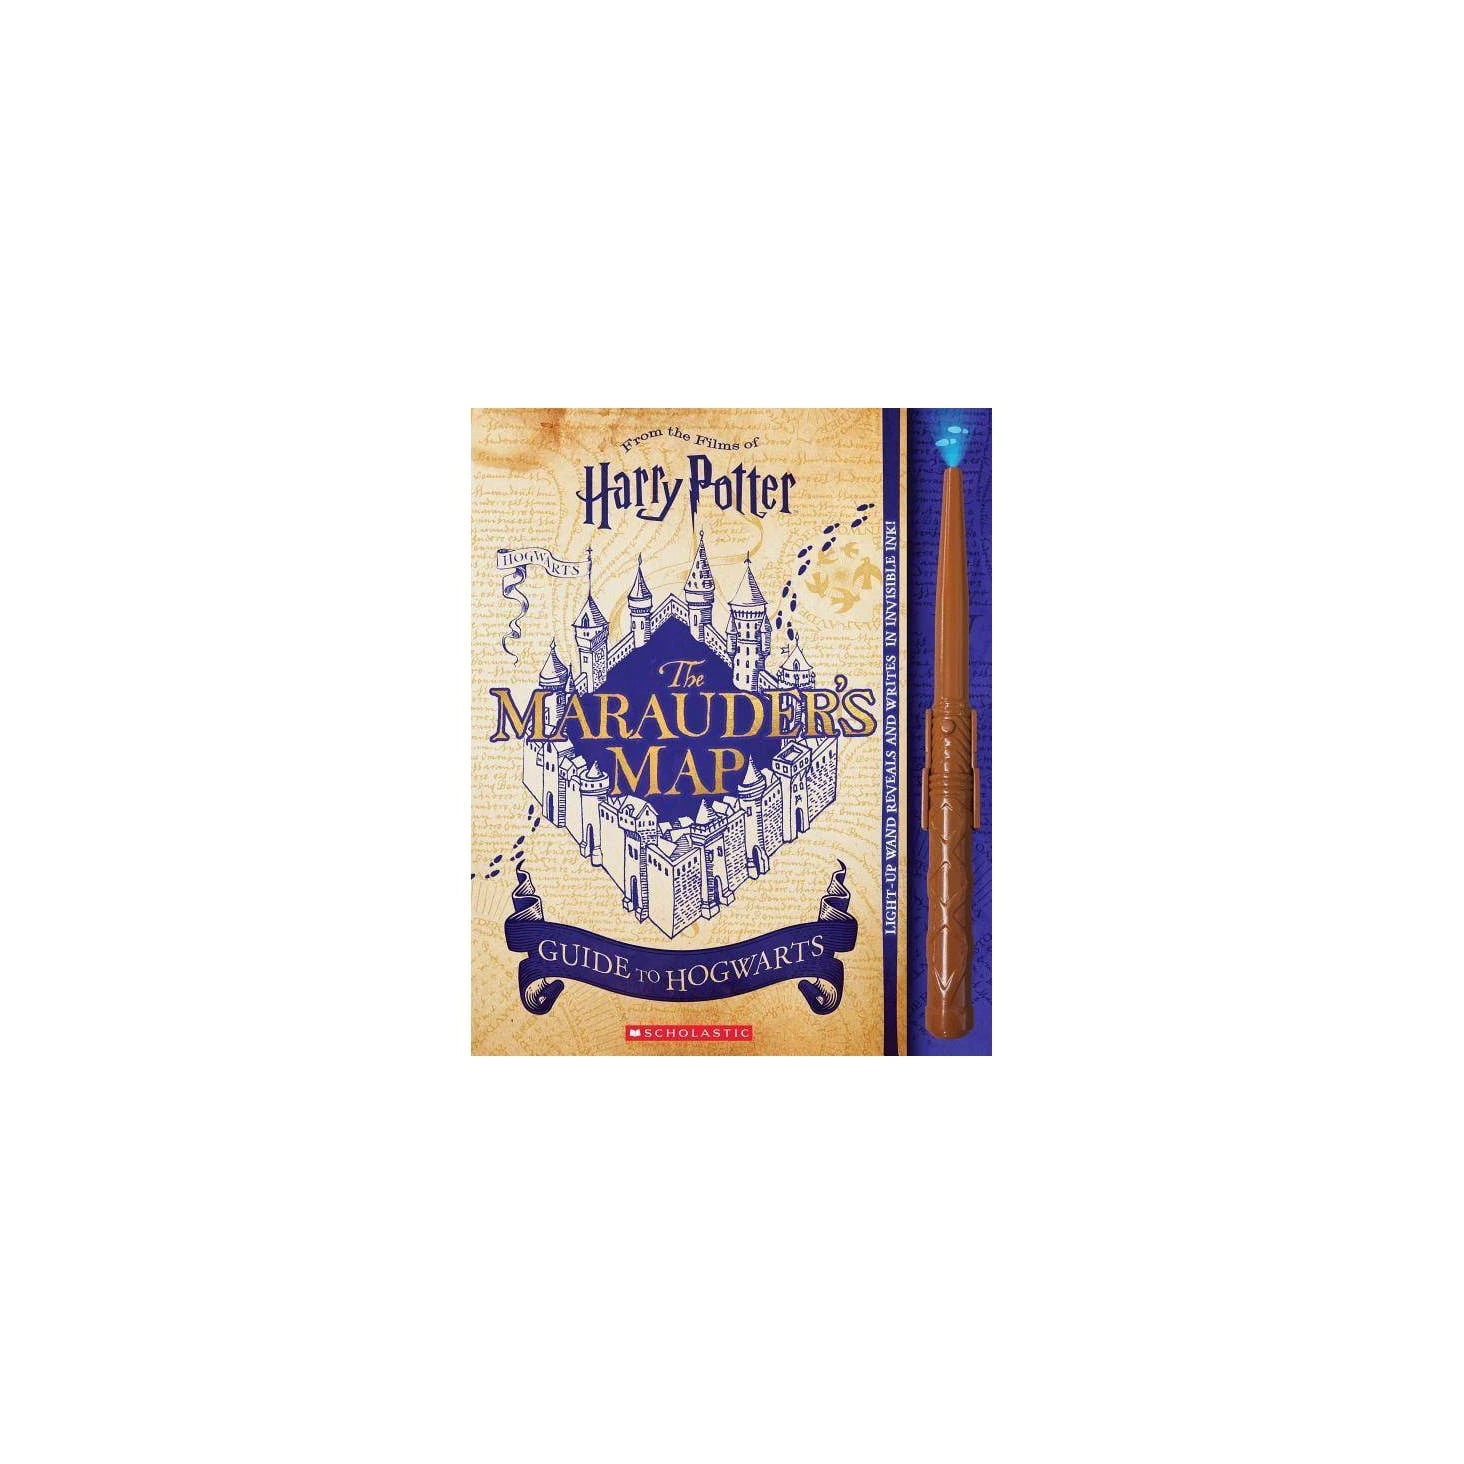 The Marauder's Map Toy